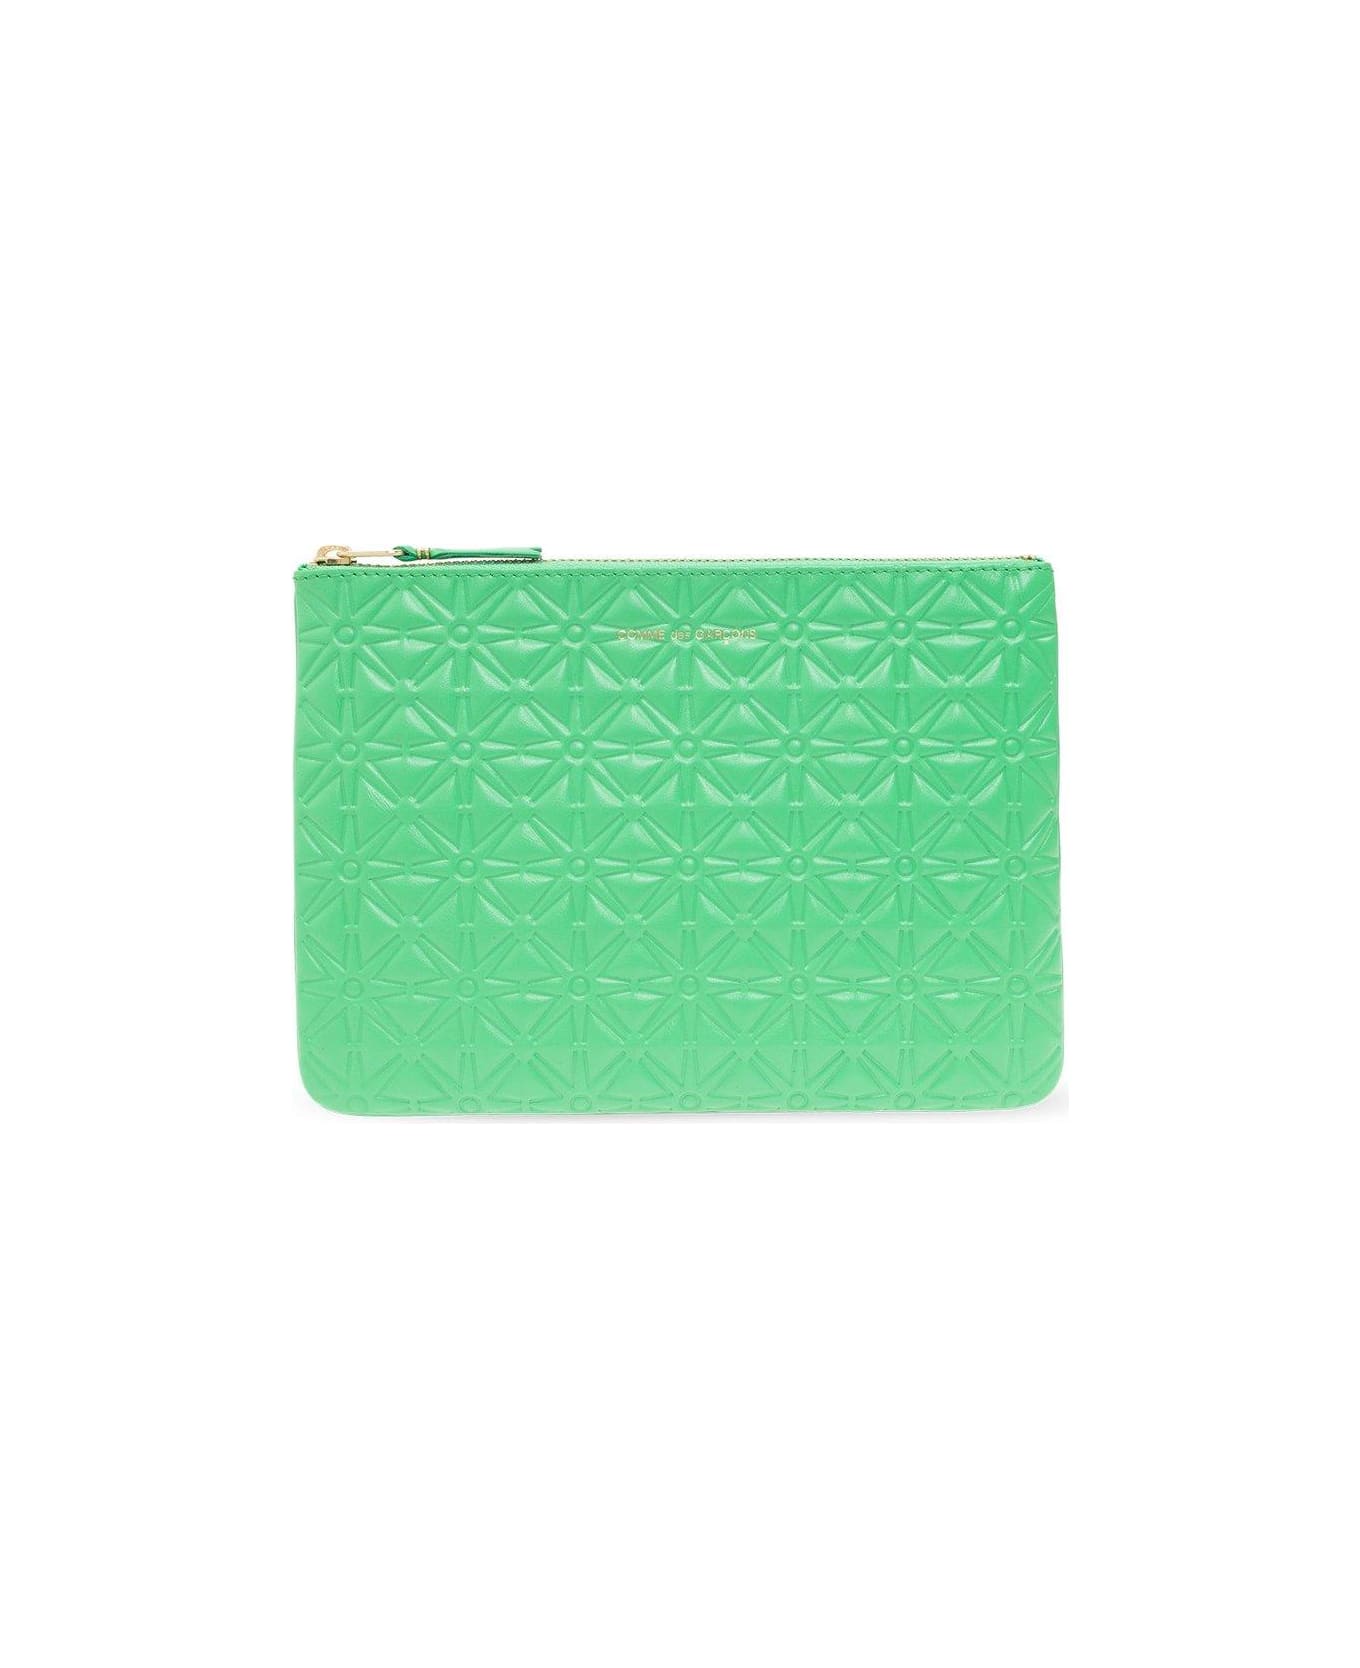 Comme des Garçons Wallet Embossed Zipped Pouch - Gree Green バッグ